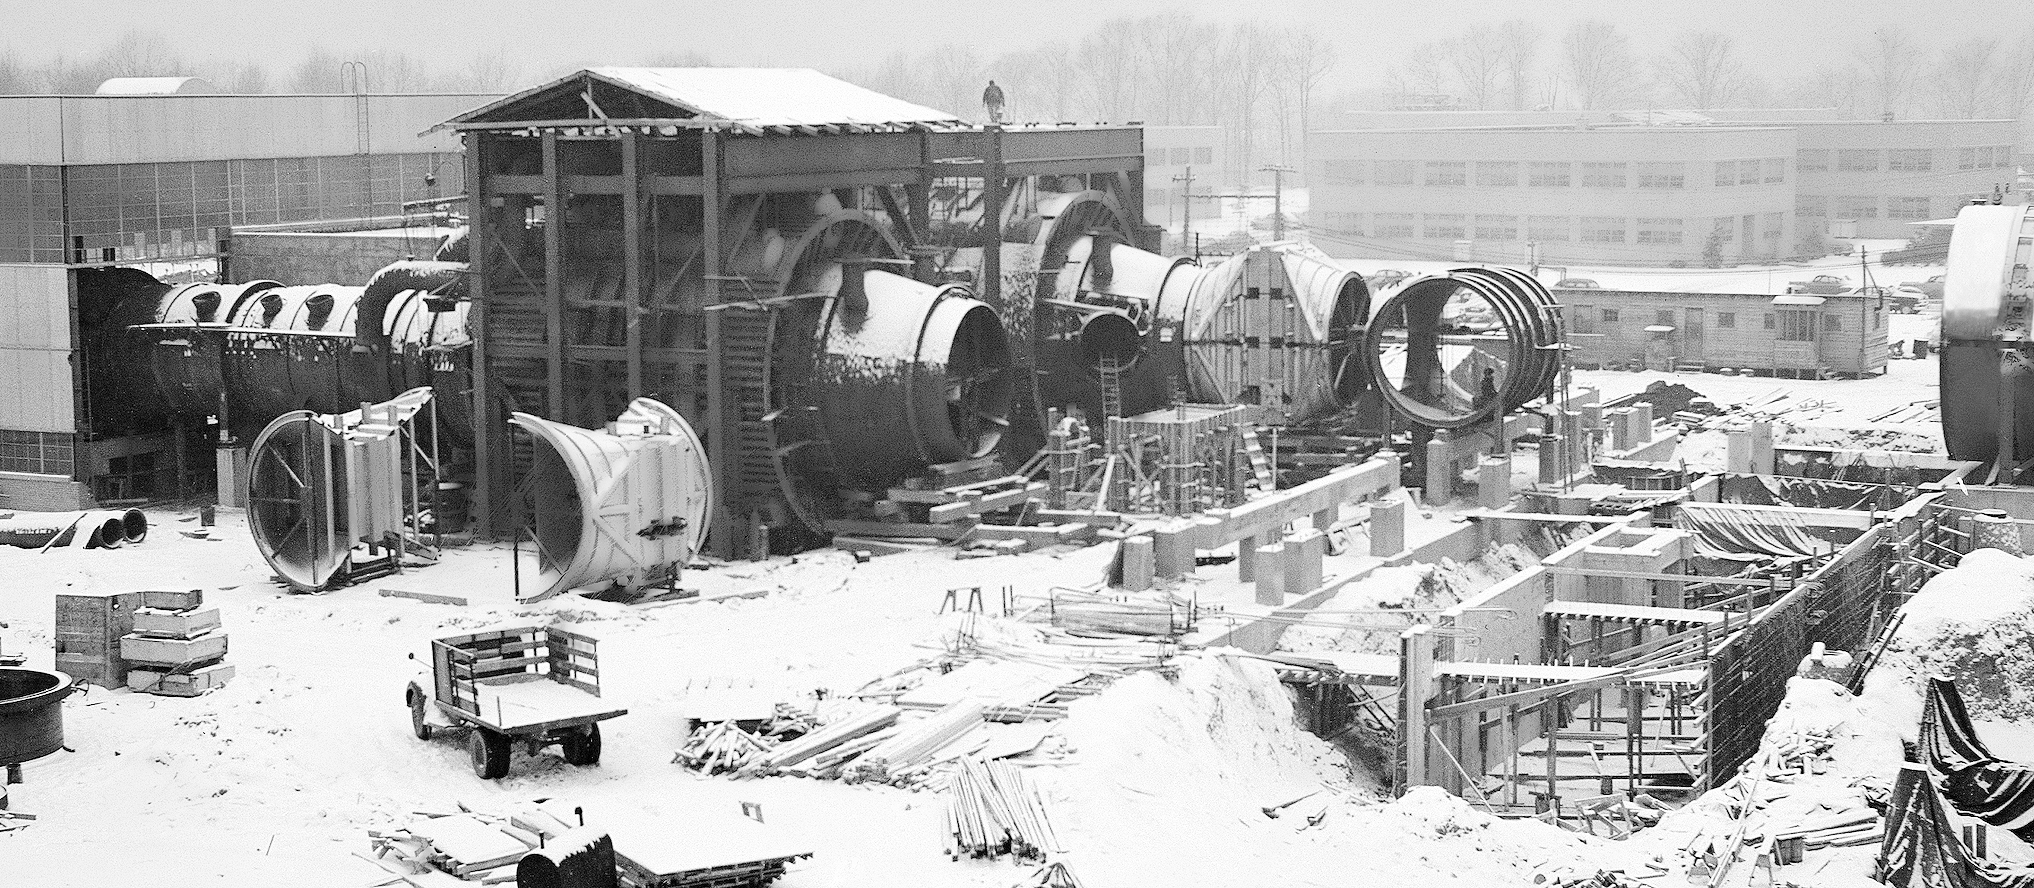 Snow covered facility construction site.